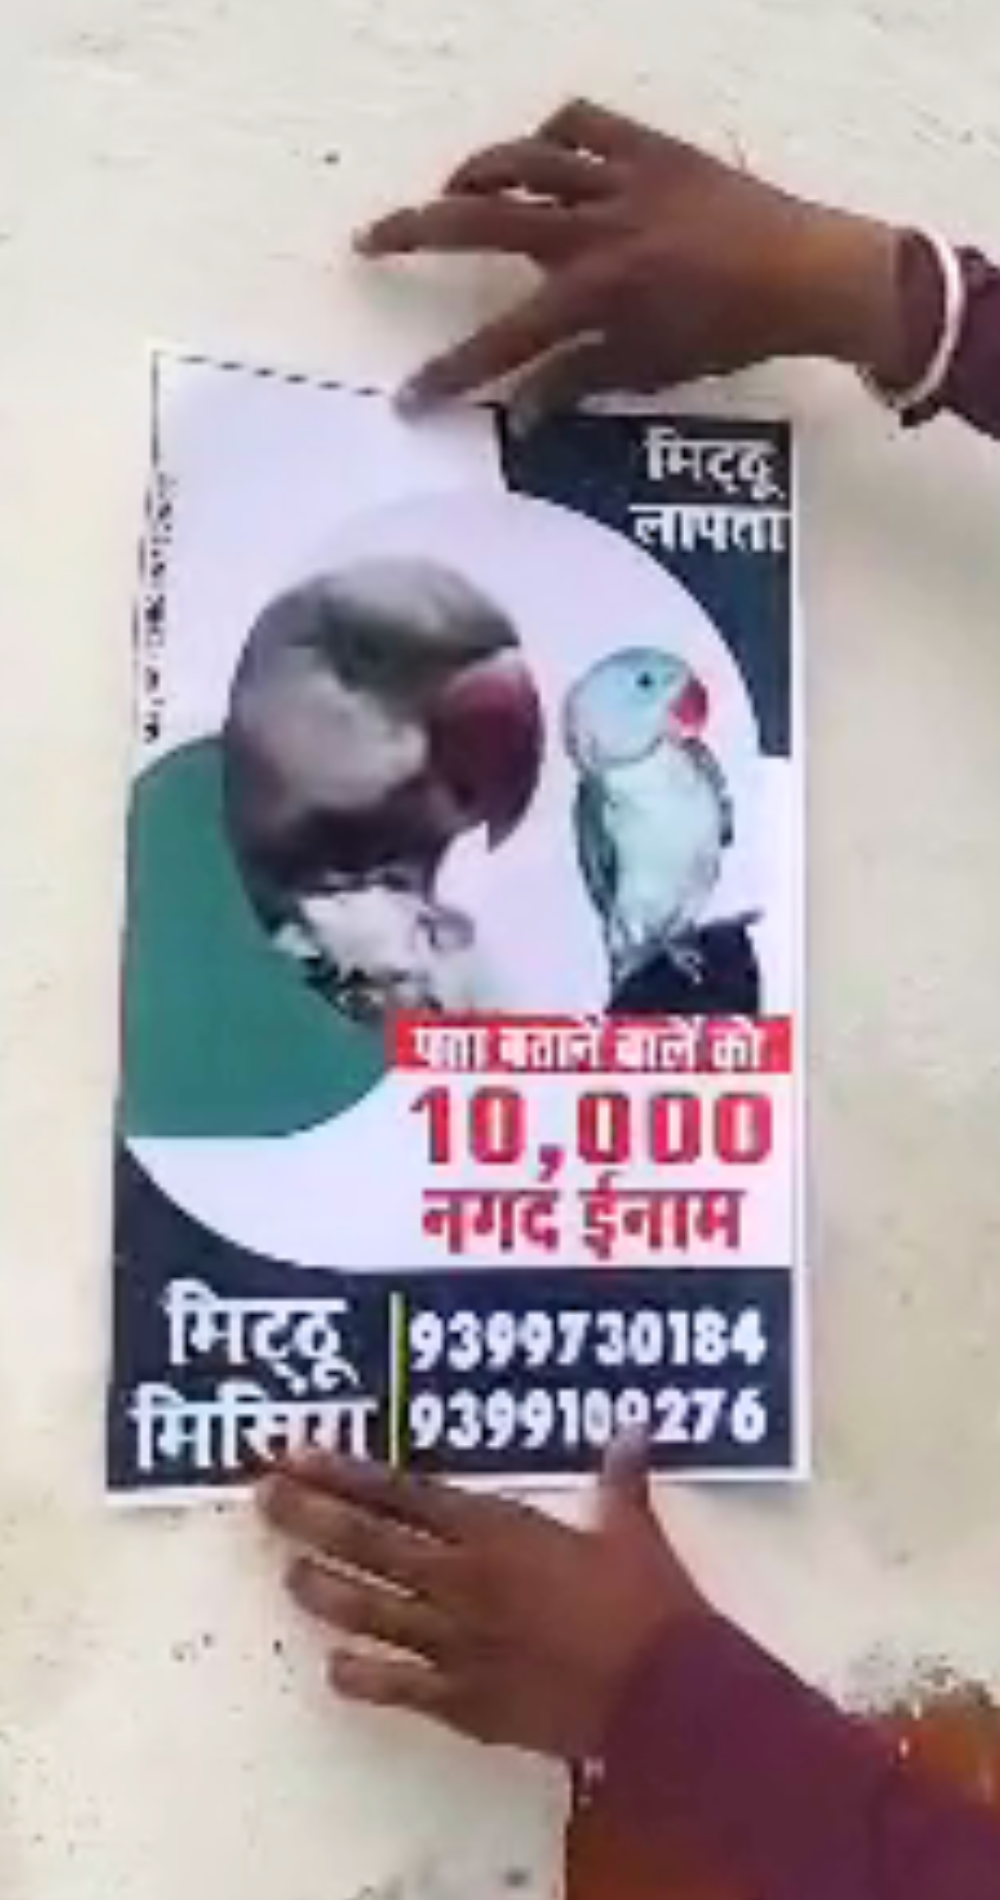 owner put up posters of missing parrot